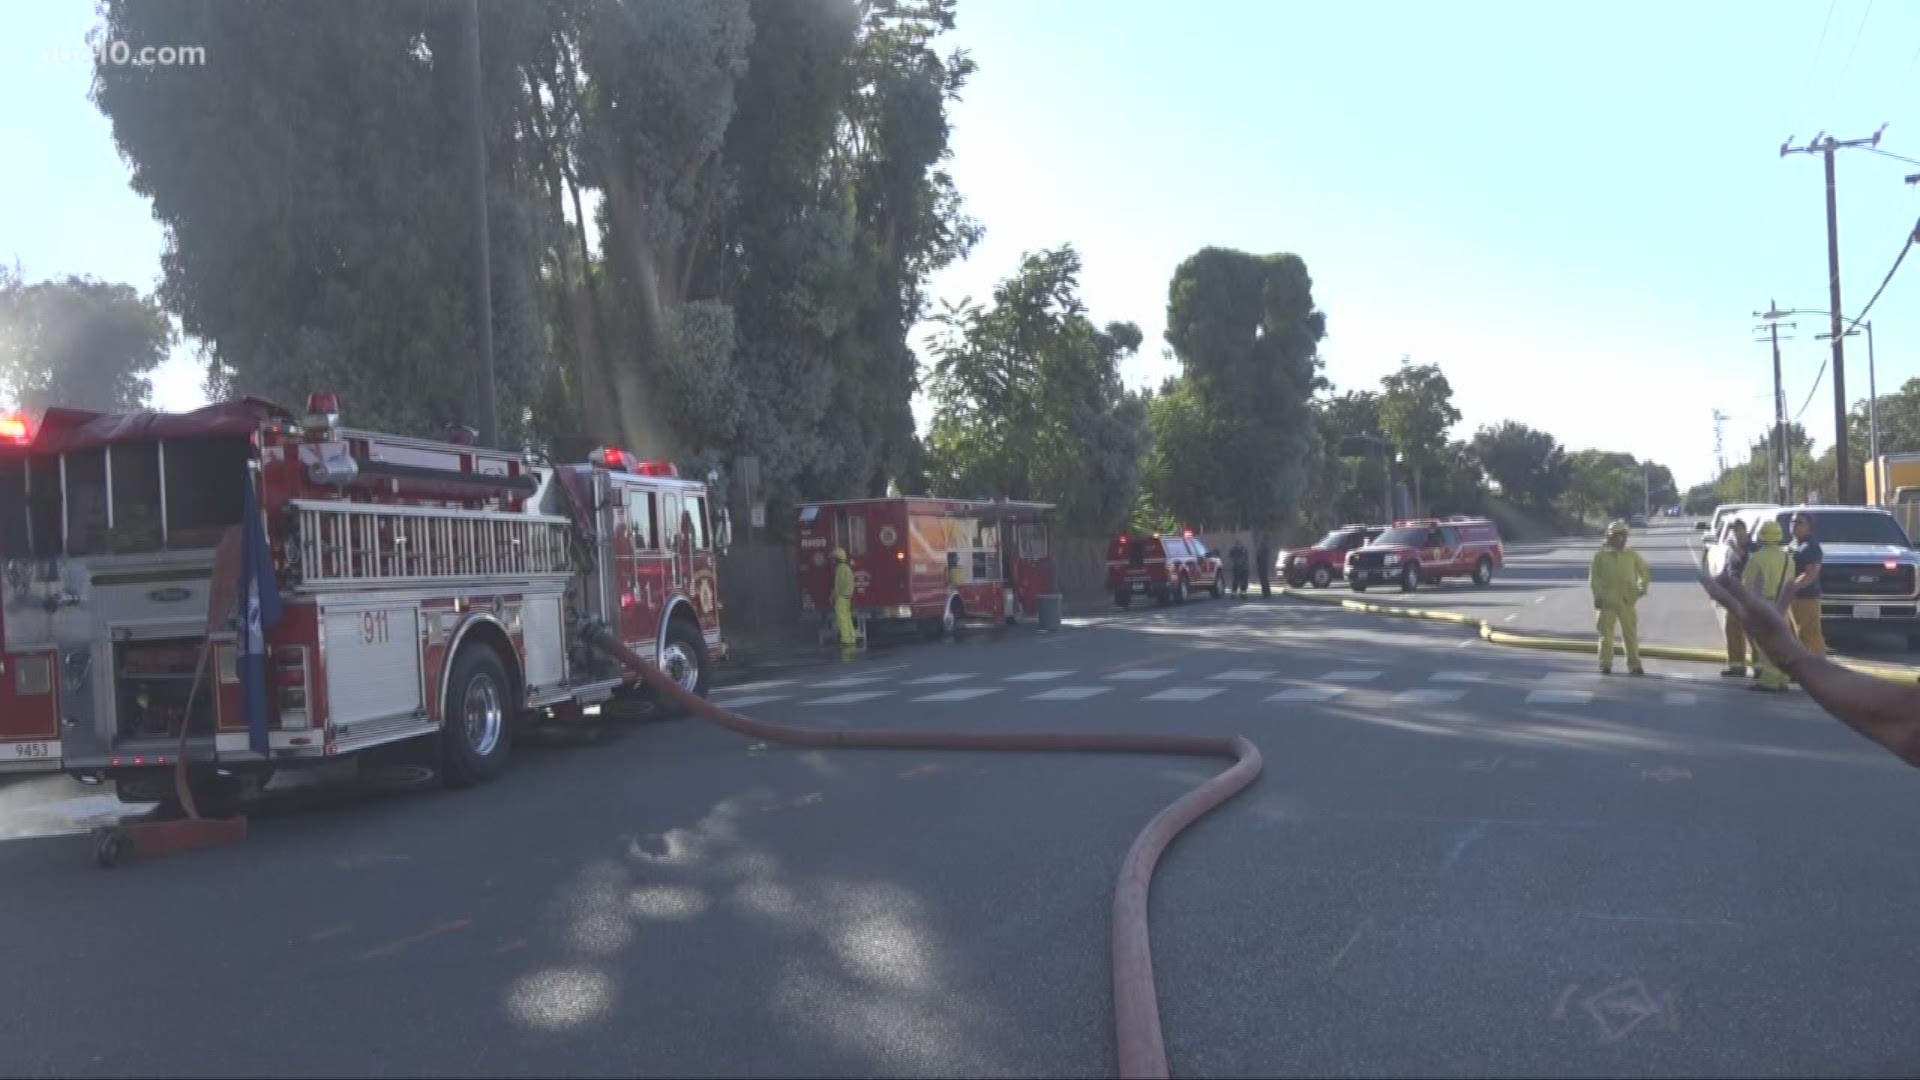 The Sacramento Fire Department responded to a fire at a metal scrapyard near North B and 10th Streets.